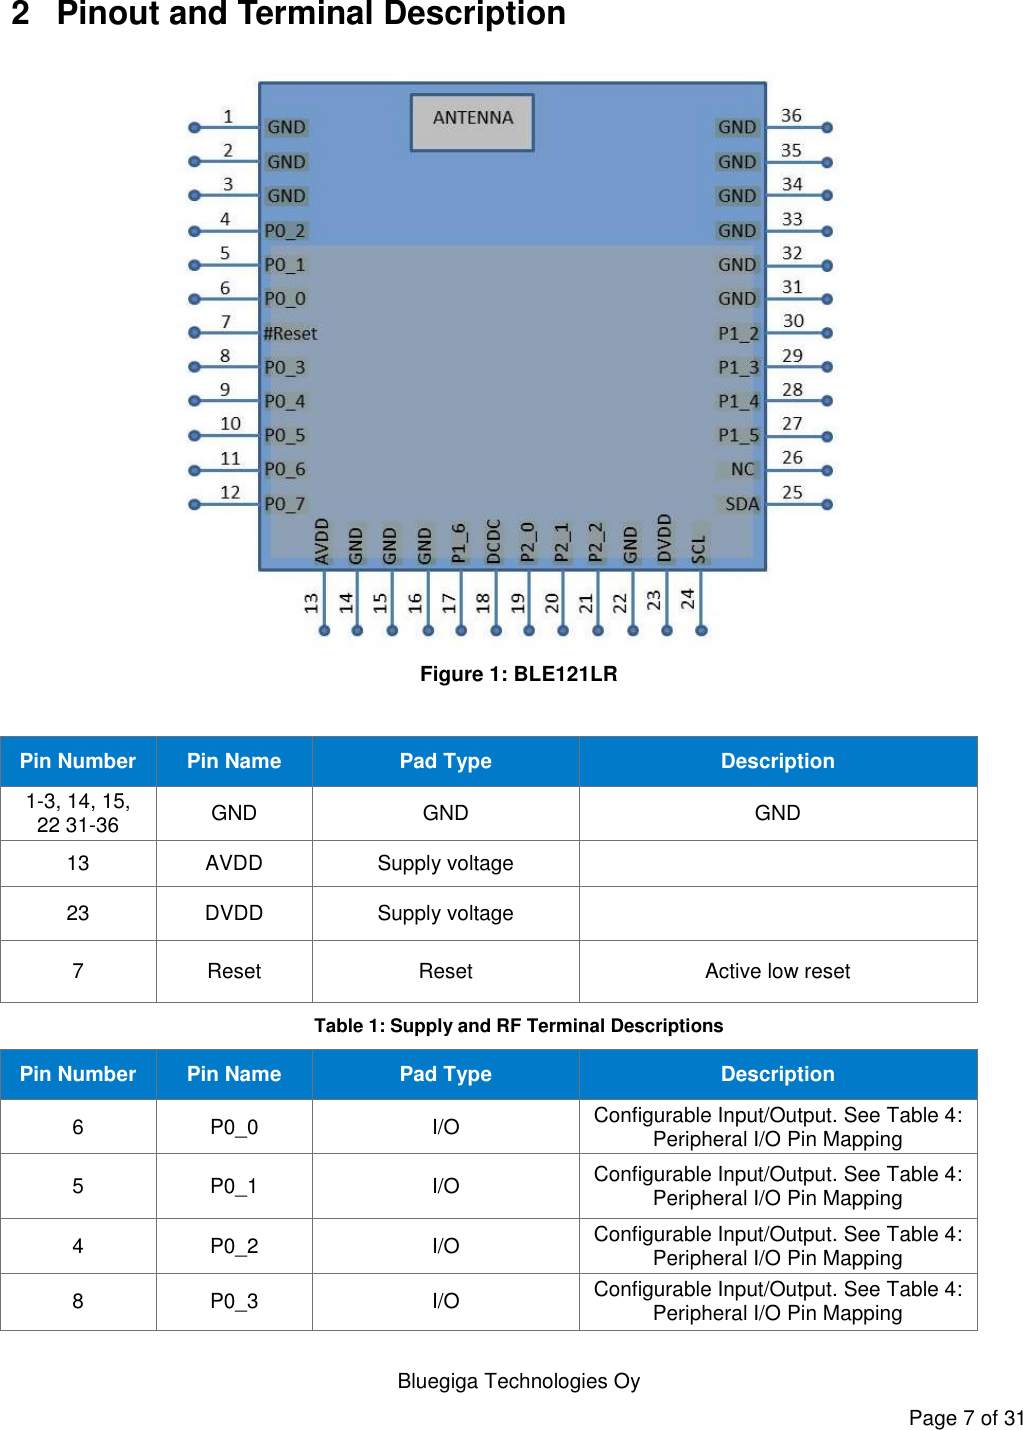   Bluegiga Technologies Oy Page 7 of 31 2  Pinout and Terminal Description  Figure 1: BLE121LR  Pin Number Pin Name Pad Type Description 1-3, 14, 15, 22 31-36 GND GND GND 13 AVDD Supply voltage  23 DVDD Supply voltage  7 Reset Reset Active low reset Table 1: Supply and RF Terminal Descriptions Pin Number Pin Name Pad Type Description 6 P0_0 I/O Configurable Input/Output. See Table 4: Peripheral I/O Pin Mapping 5 P0_1 I/O Configurable Input/Output. See Table 4: Peripheral I/O Pin Mapping 4 P0_2 I/O Configurable Input/Output. See Table 4: Peripheral I/O Pin Mapping 8 P0_3 I/O Configurable Input/Output. See Table 4: Peripheral I/O Pin Mapping 